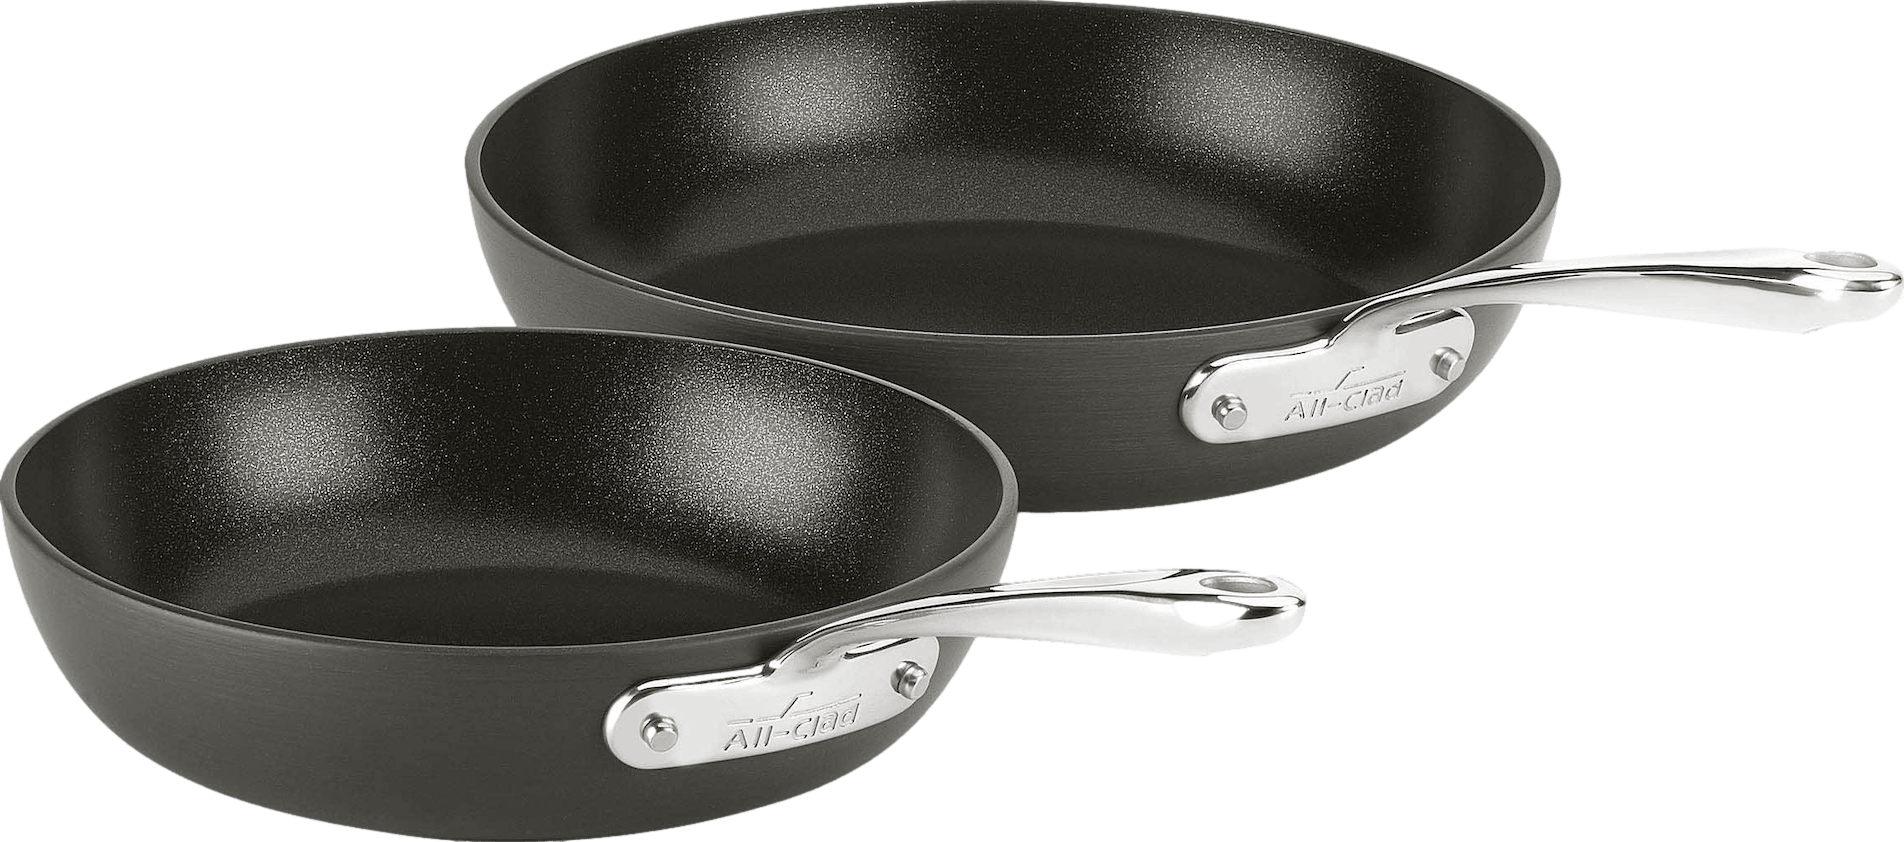 High Performance Nonstick Griddle Pan/Flat Grill 11 Inch Black Coating -  China Nonstick Cookware and Cookware Set price